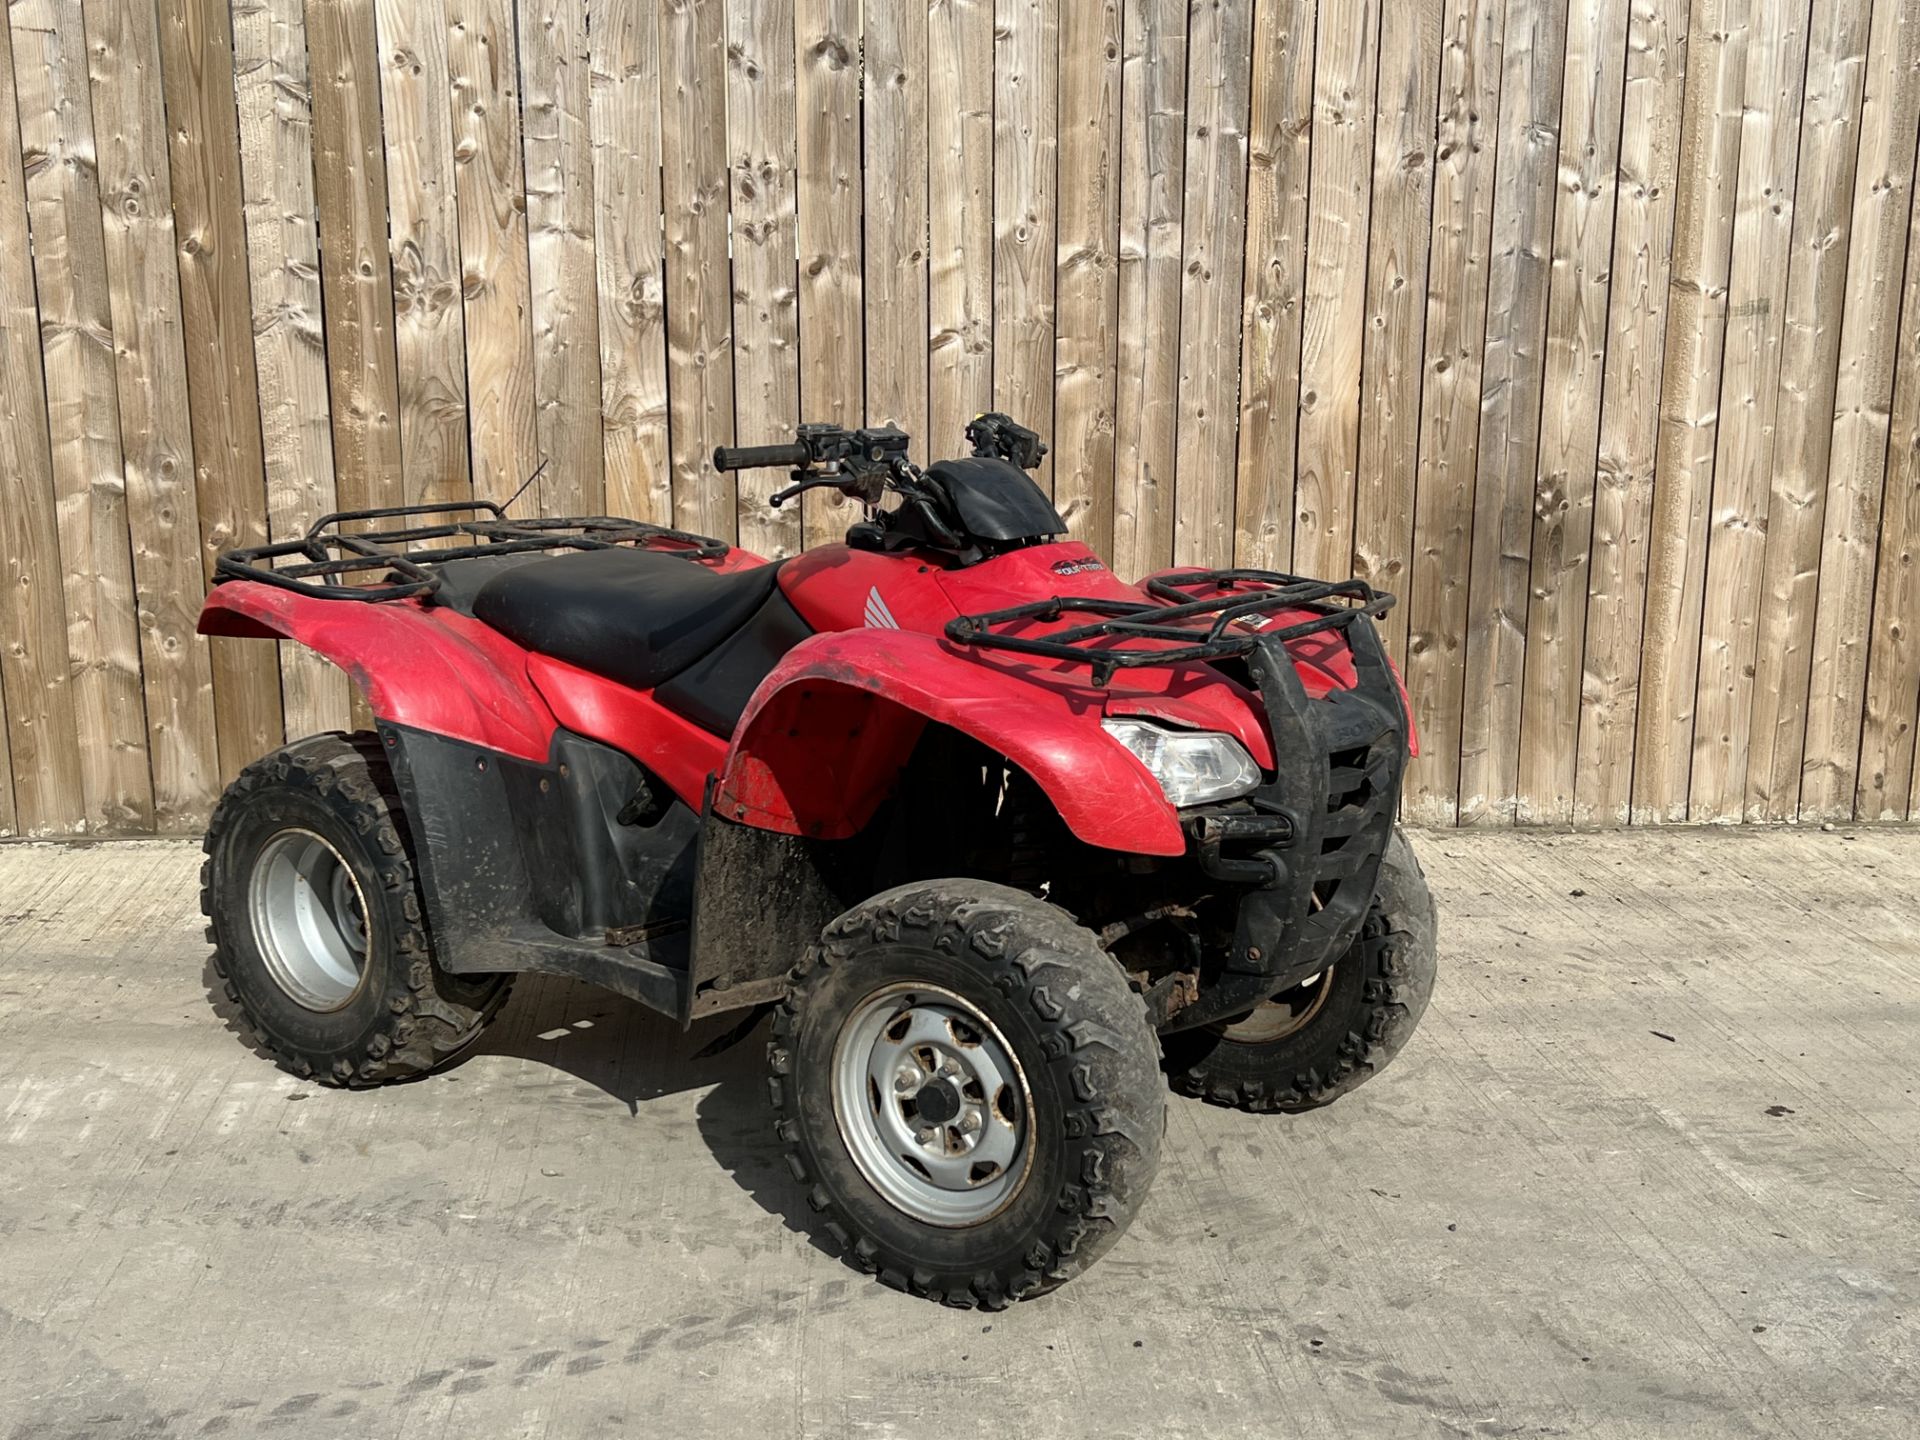 HONDA FOURTRAX 420 QUAD 2011.STARTS RUNS AND DRIVES 2/4 WD PLUS VAT LOCATED IN NORTH YORKSHIRE.